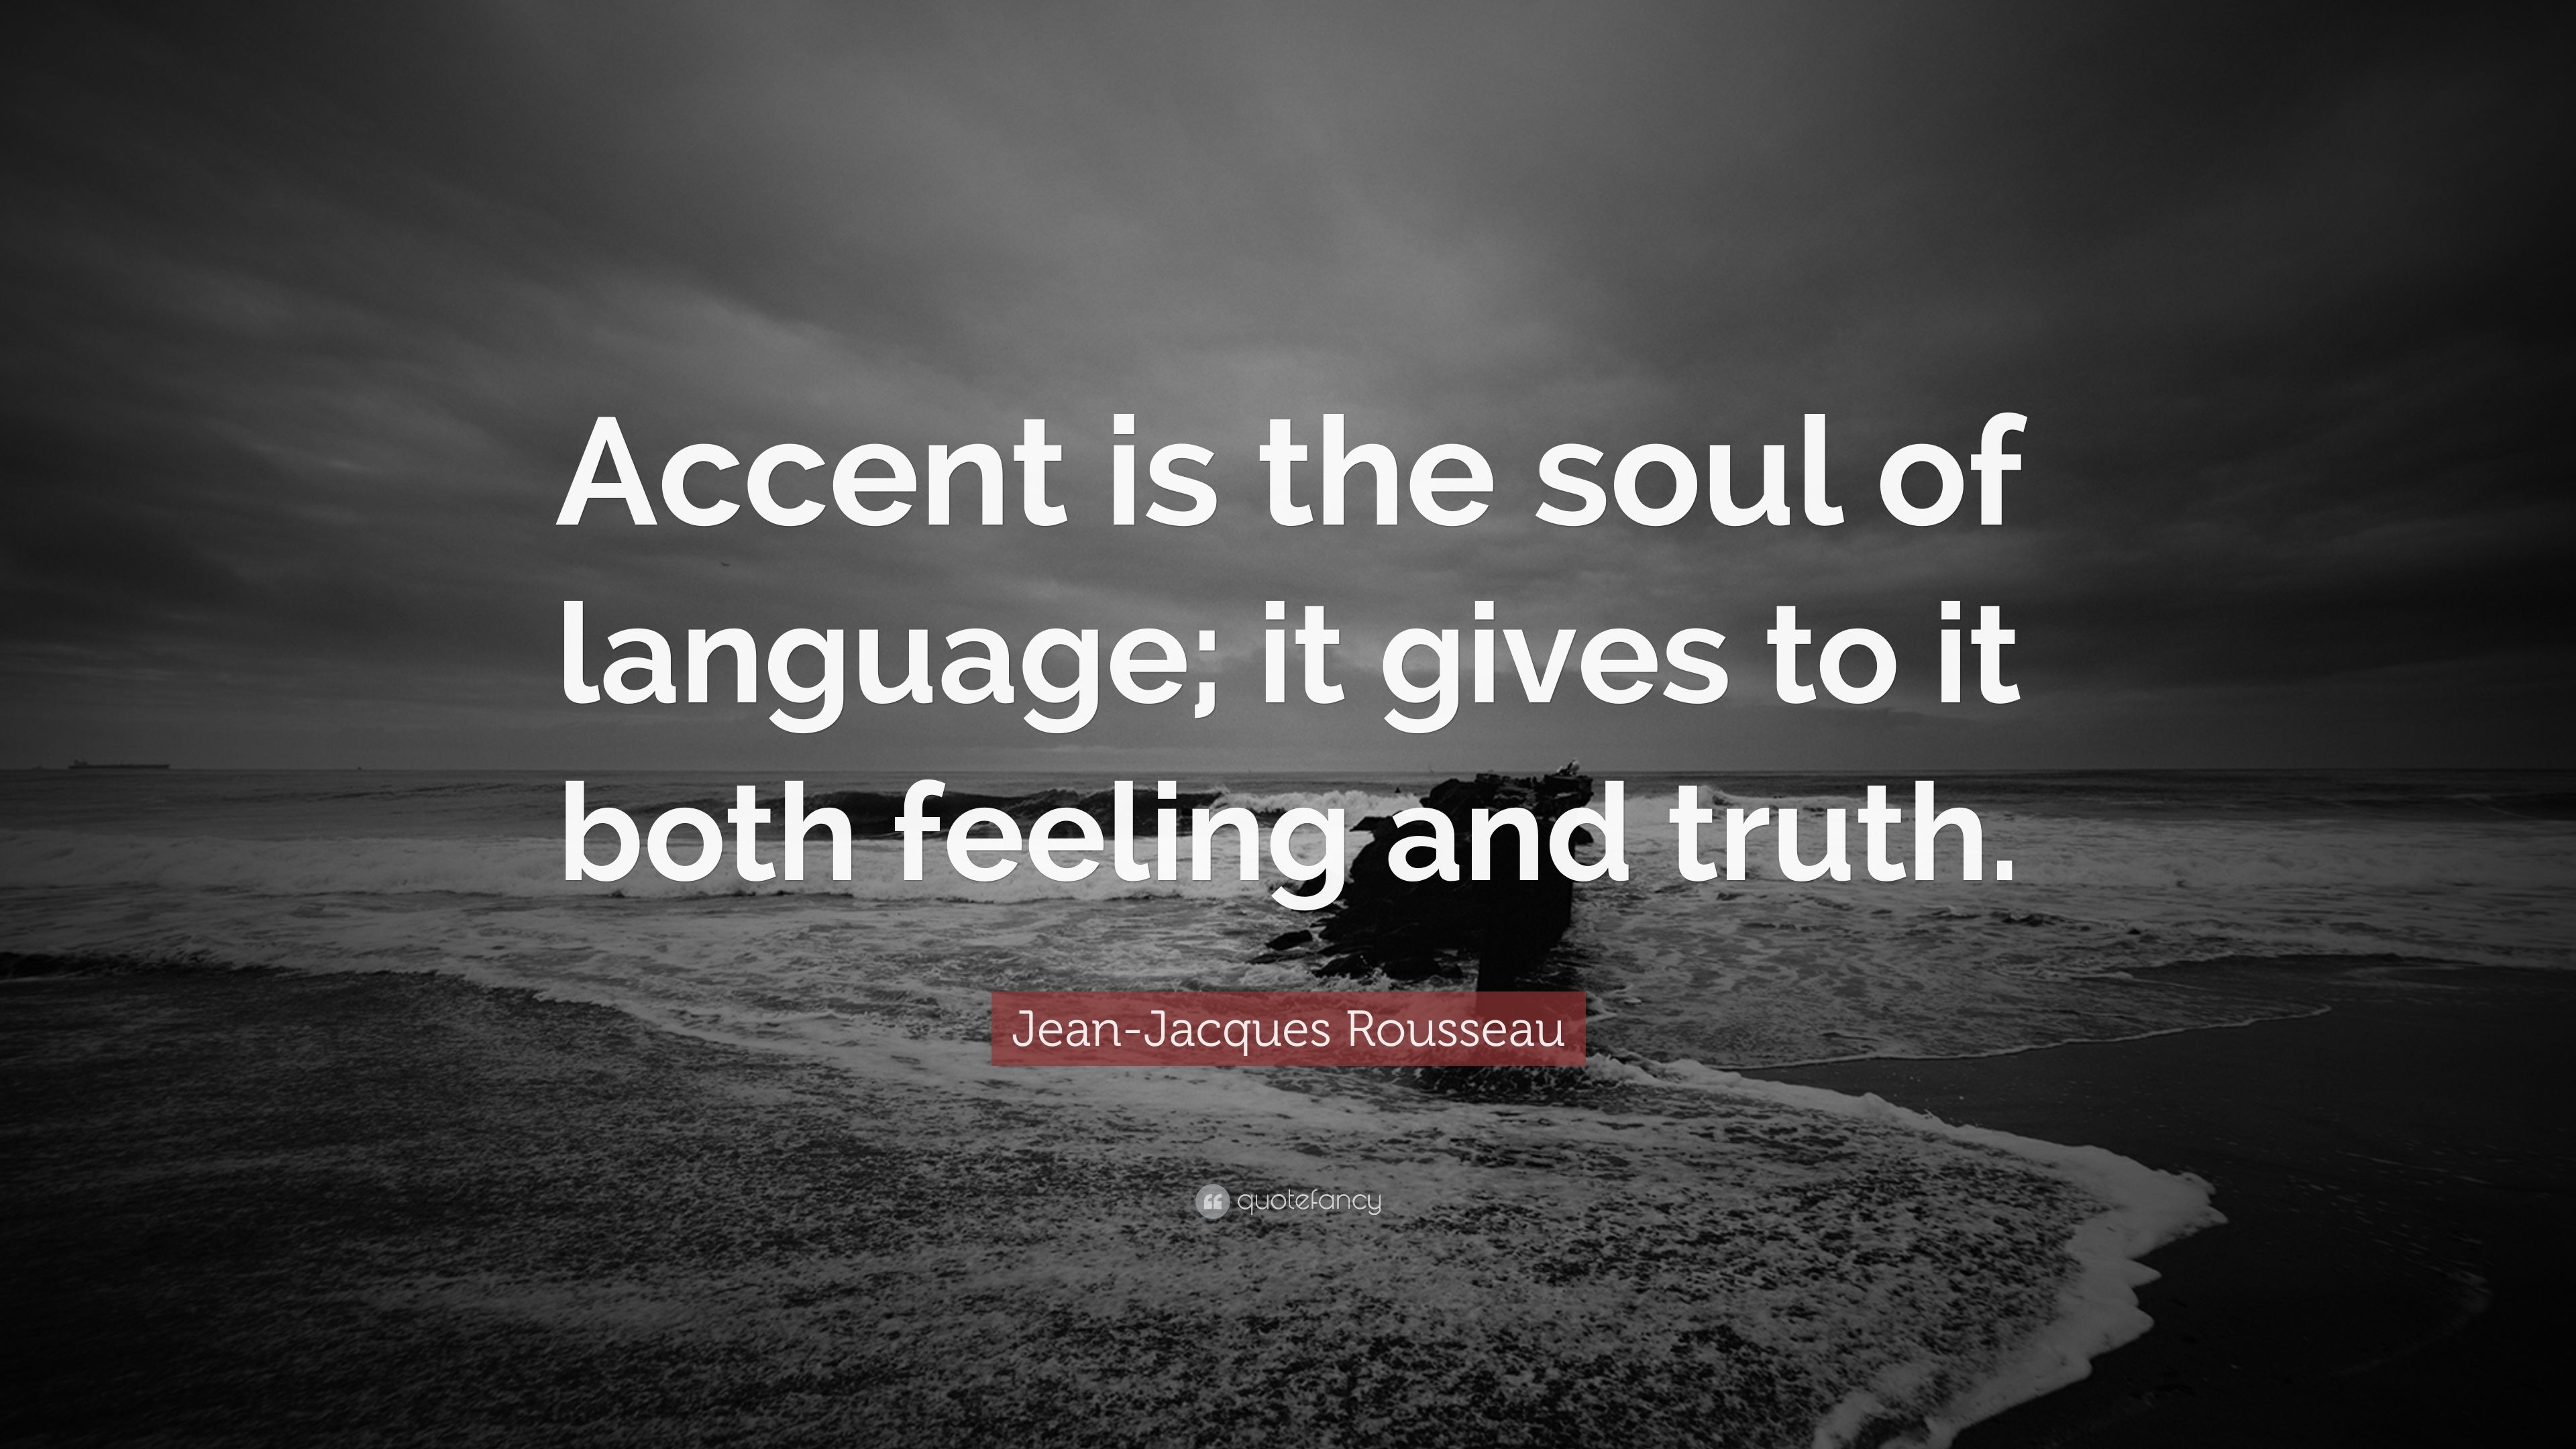 Jean Jacques Rousseau Quote: “Accent Is The Soul Of Language; It Gives To It Both Feeling And Truth.” (10 Wallpaper)